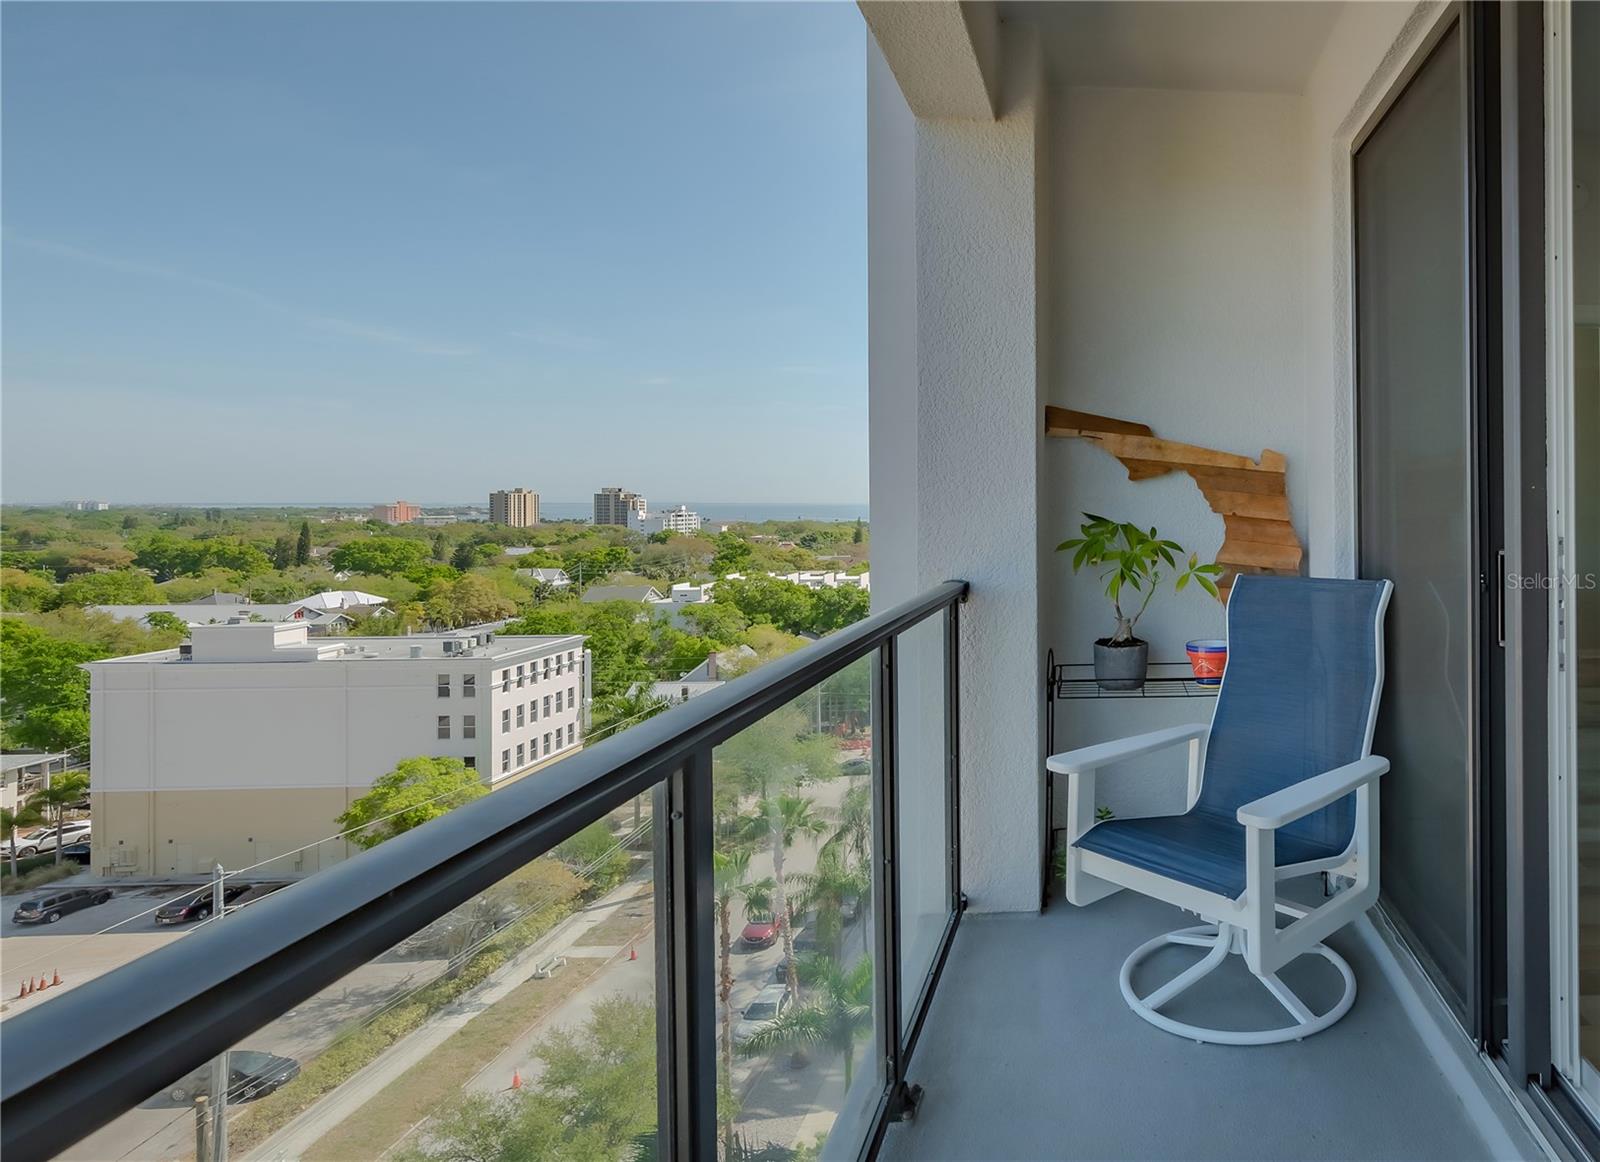 Take in Tampa Bay from your balcony